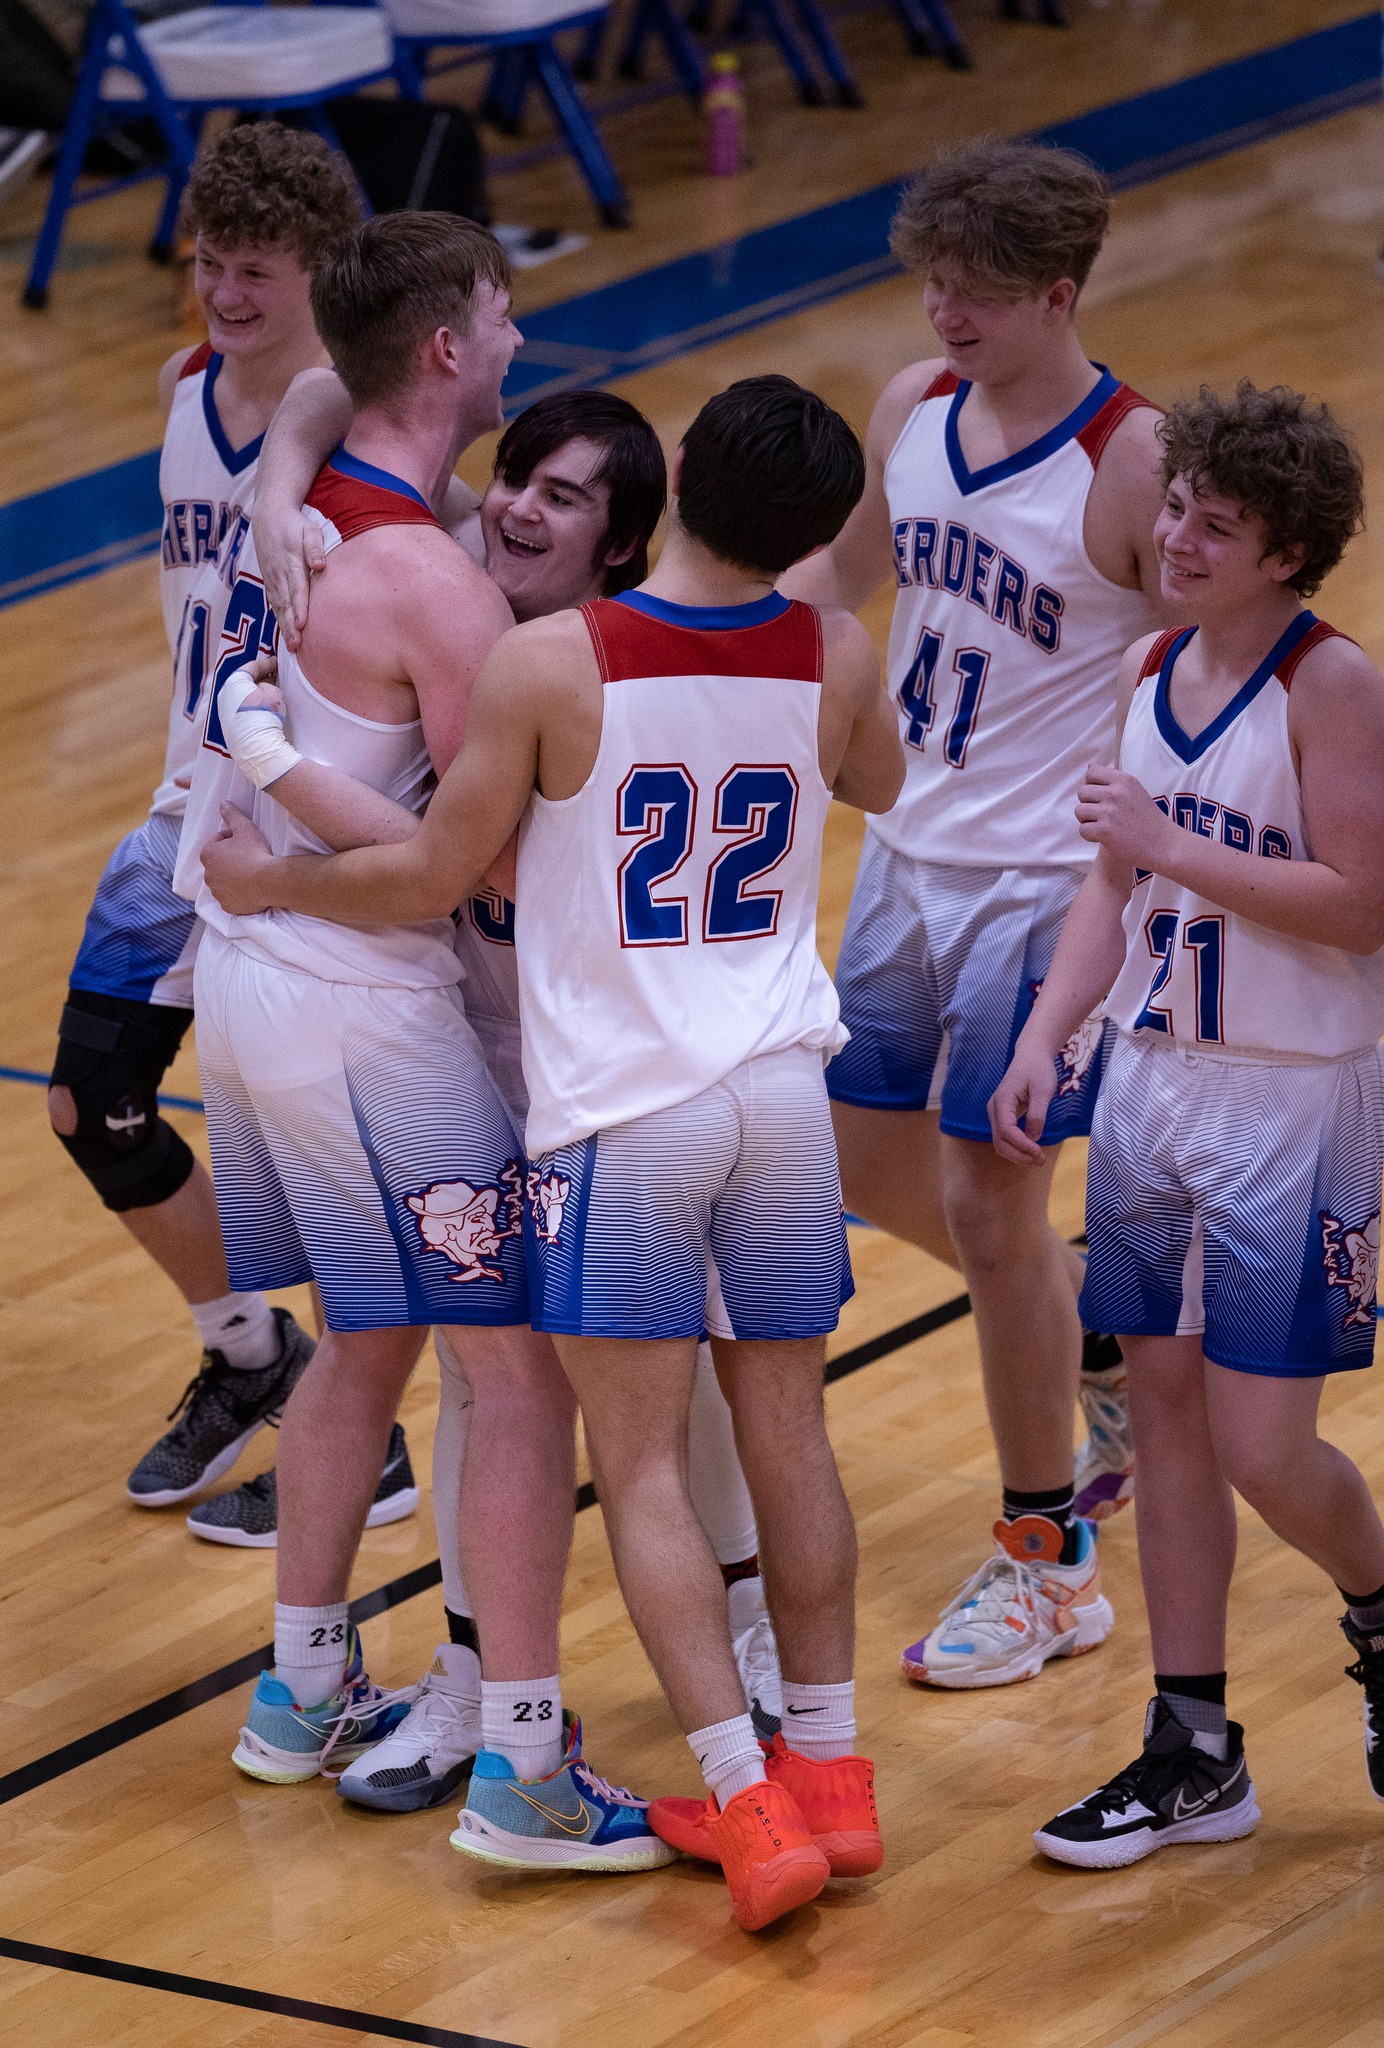 herder boys basketball payers celebrate after a game